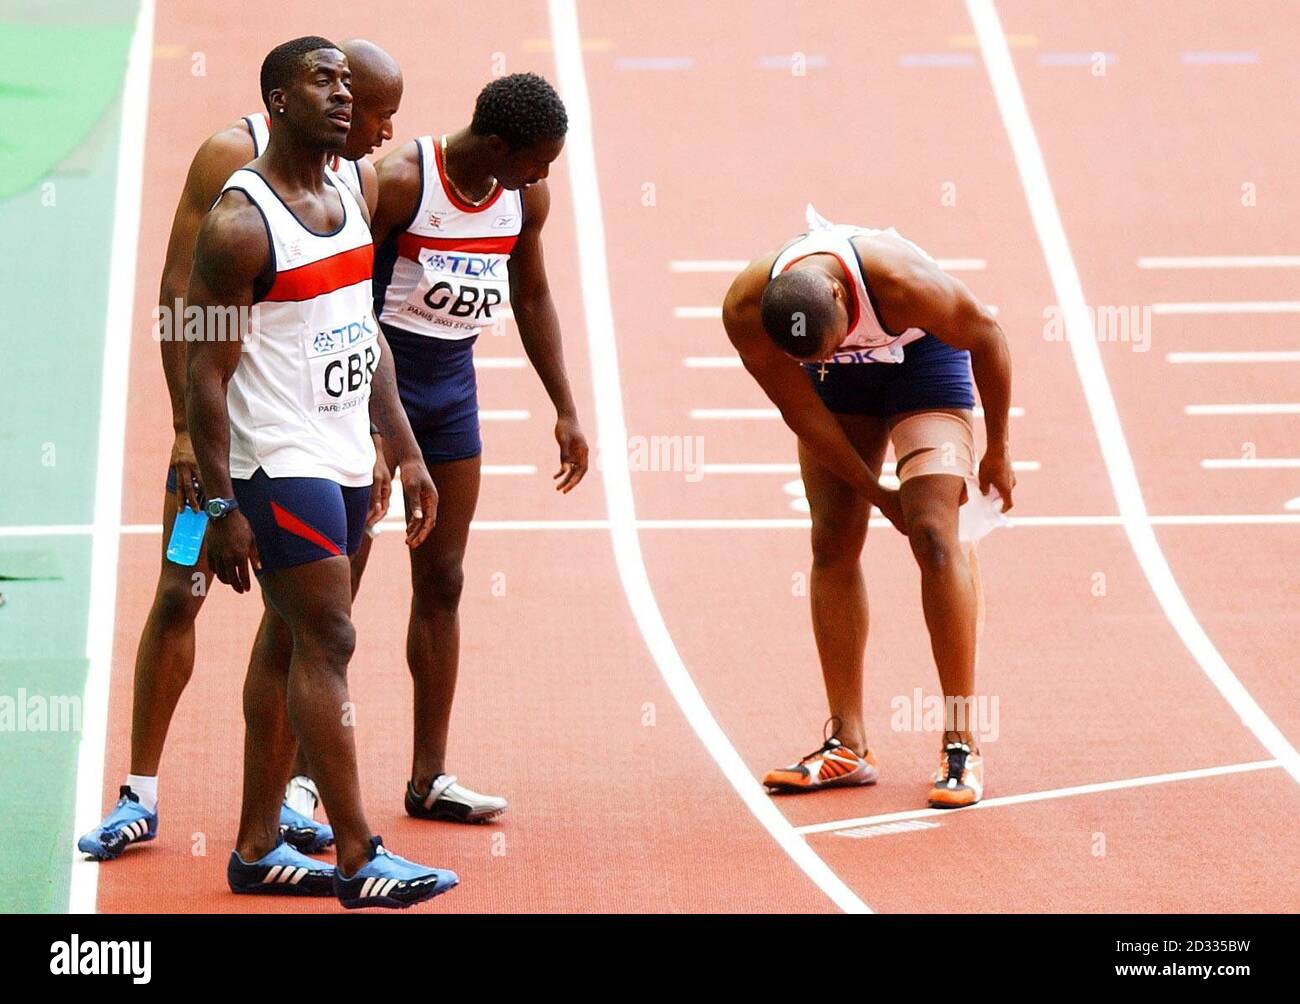 The GB 4x100 relay team (from l-r), Dwain Chambers, Marlon Devonish and Christian Malcolm look on, as team-mate Darren Campbell (far right) wraps up his injured leg after finishing second behind the USA team in the men's 4x100 relay final at the Athletics World Championships in Paris. Stock Photo